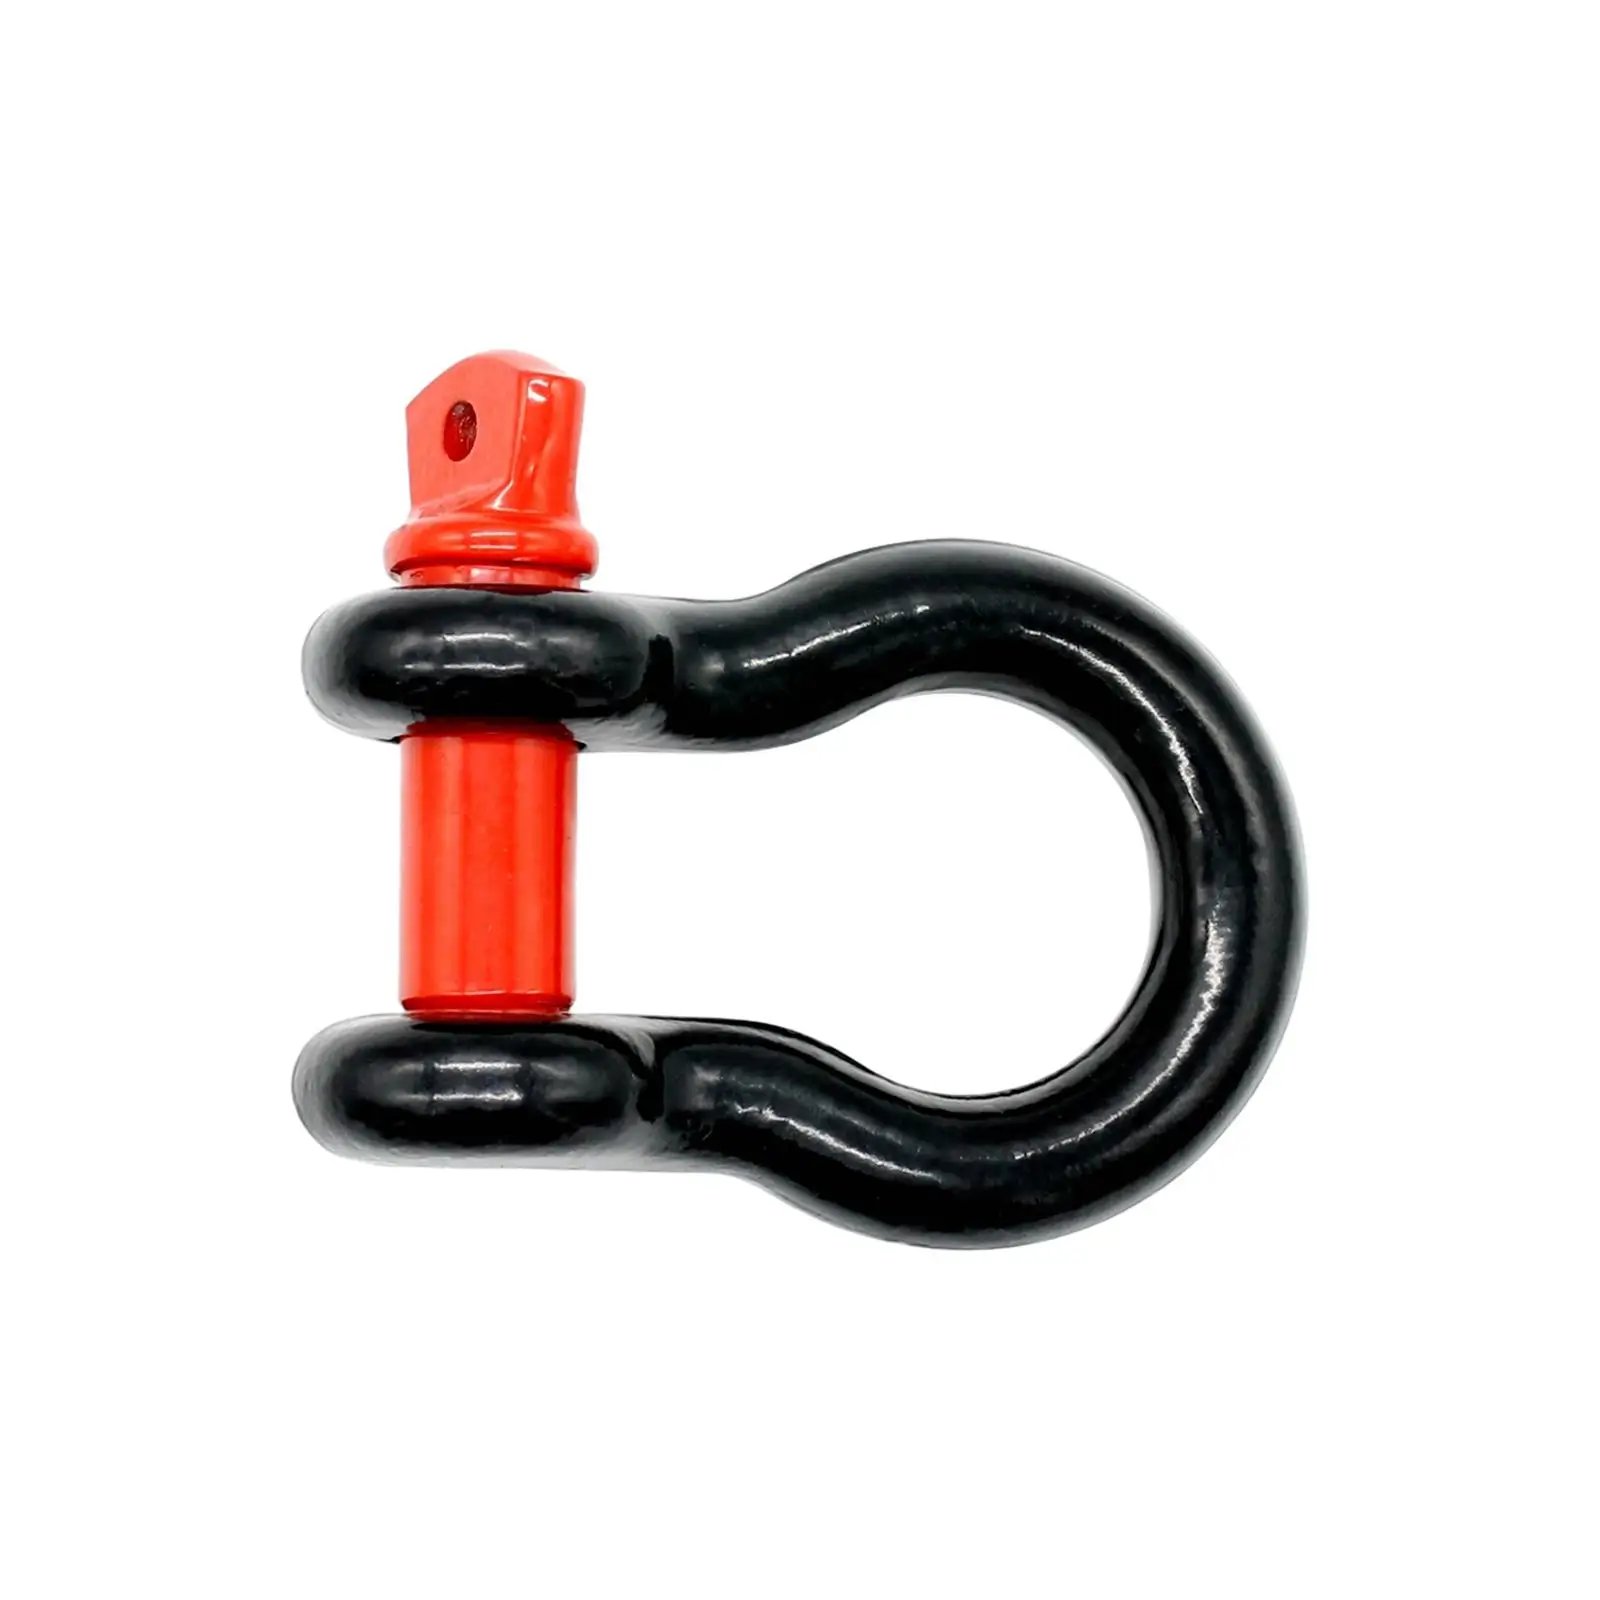 Tow Hook Heavy Duty Tow Rope Shackles for Truck Long Service Life